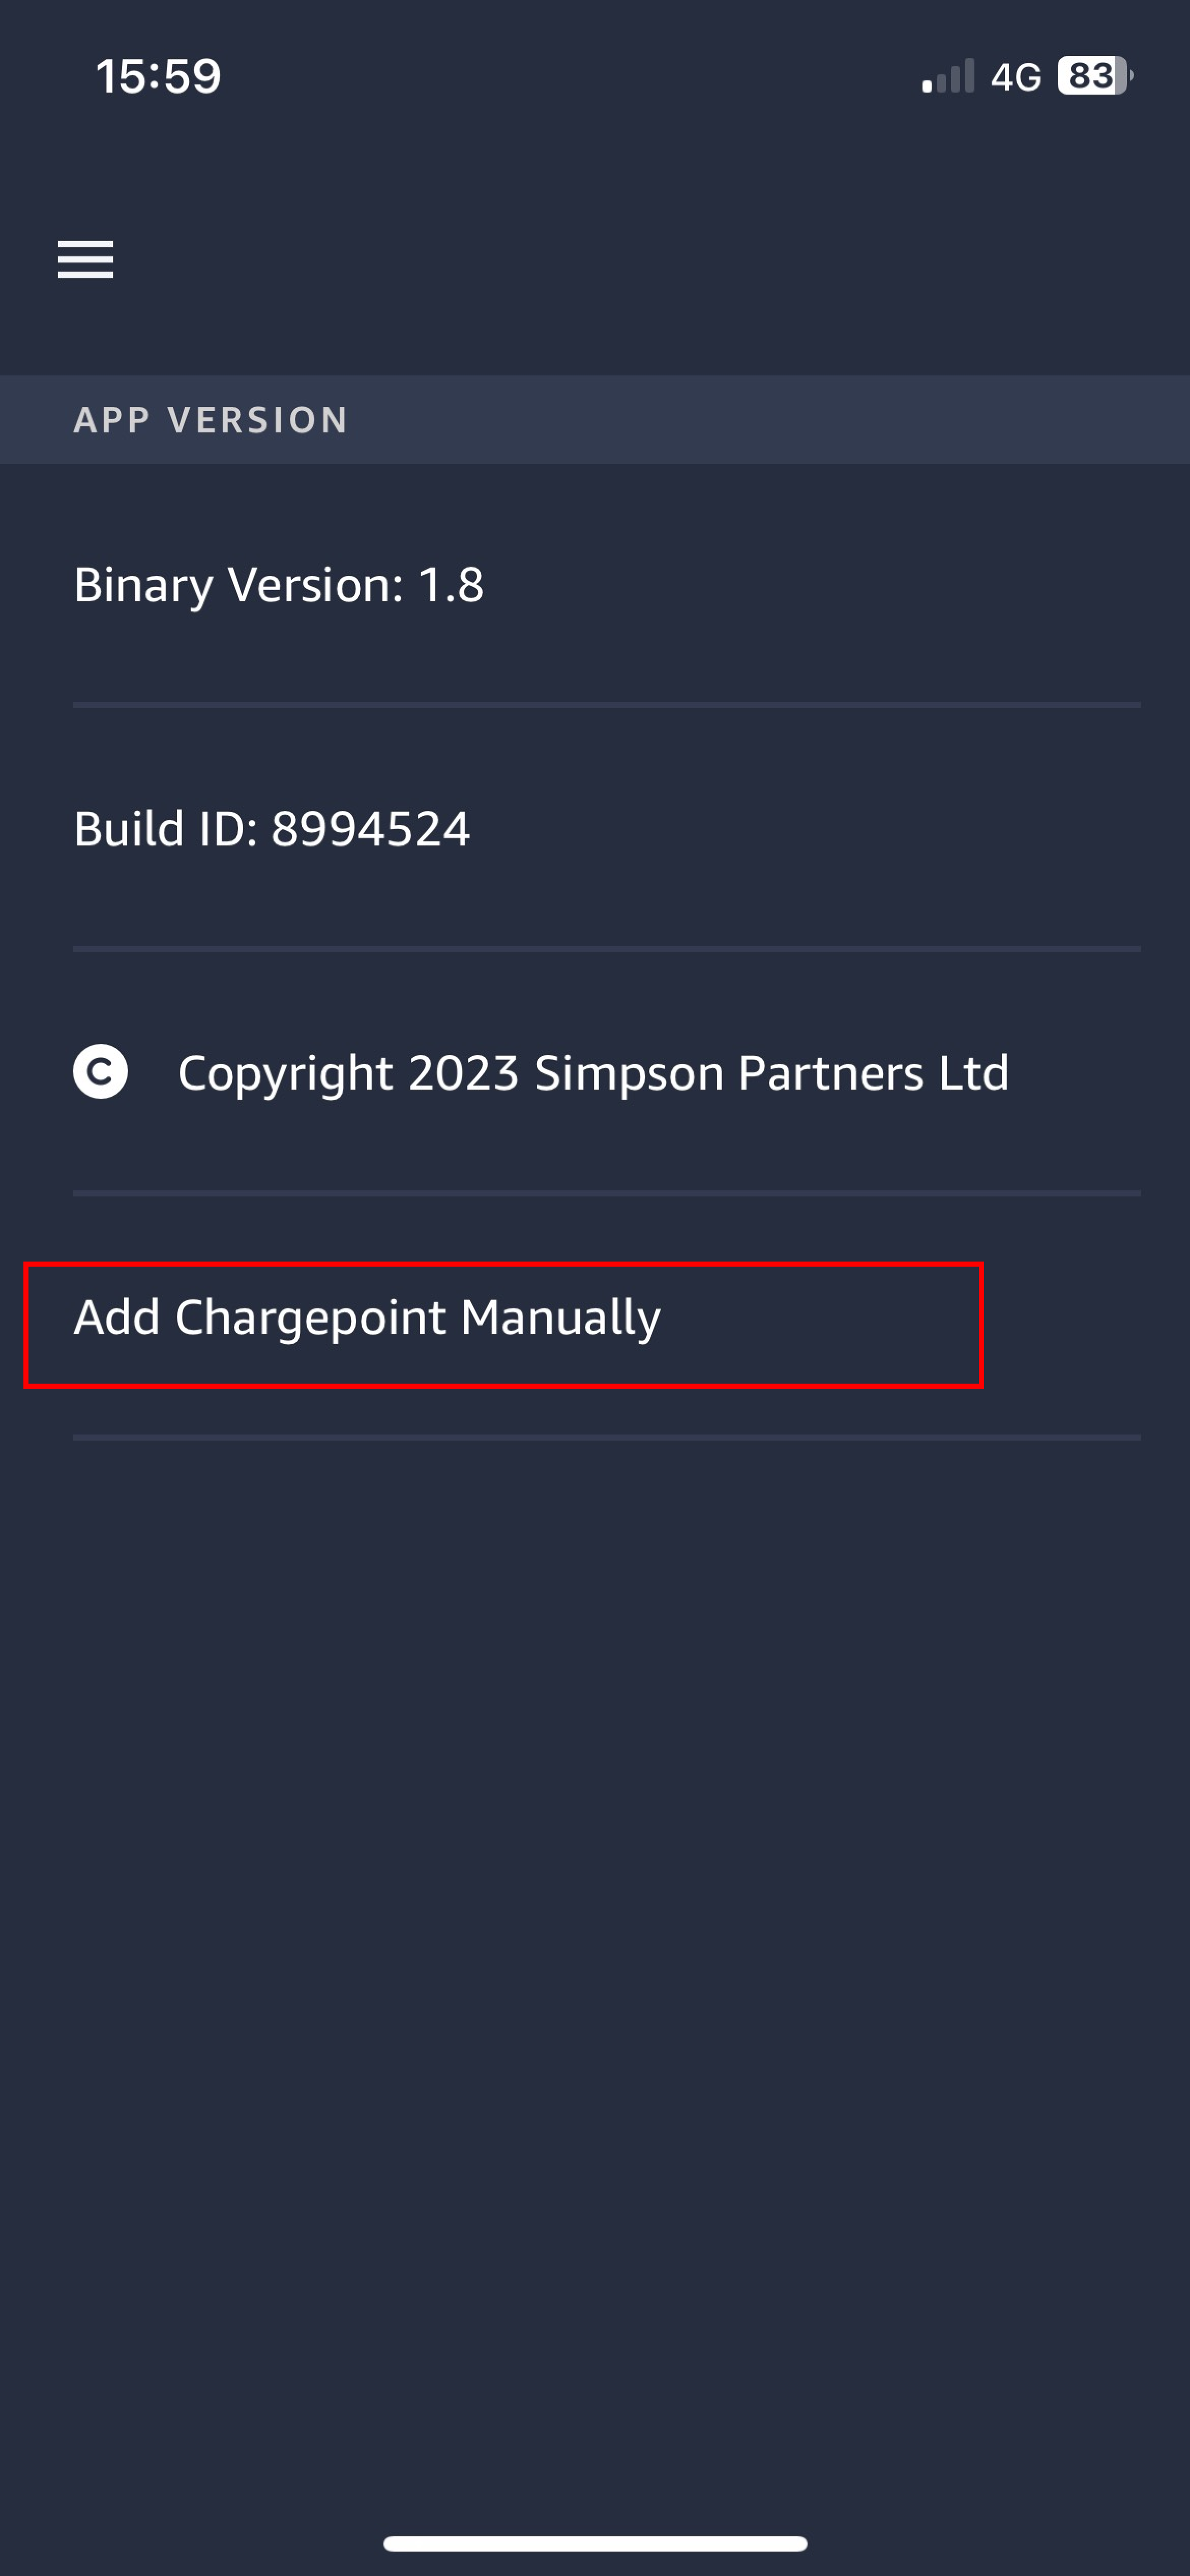 Add chargepoint manually